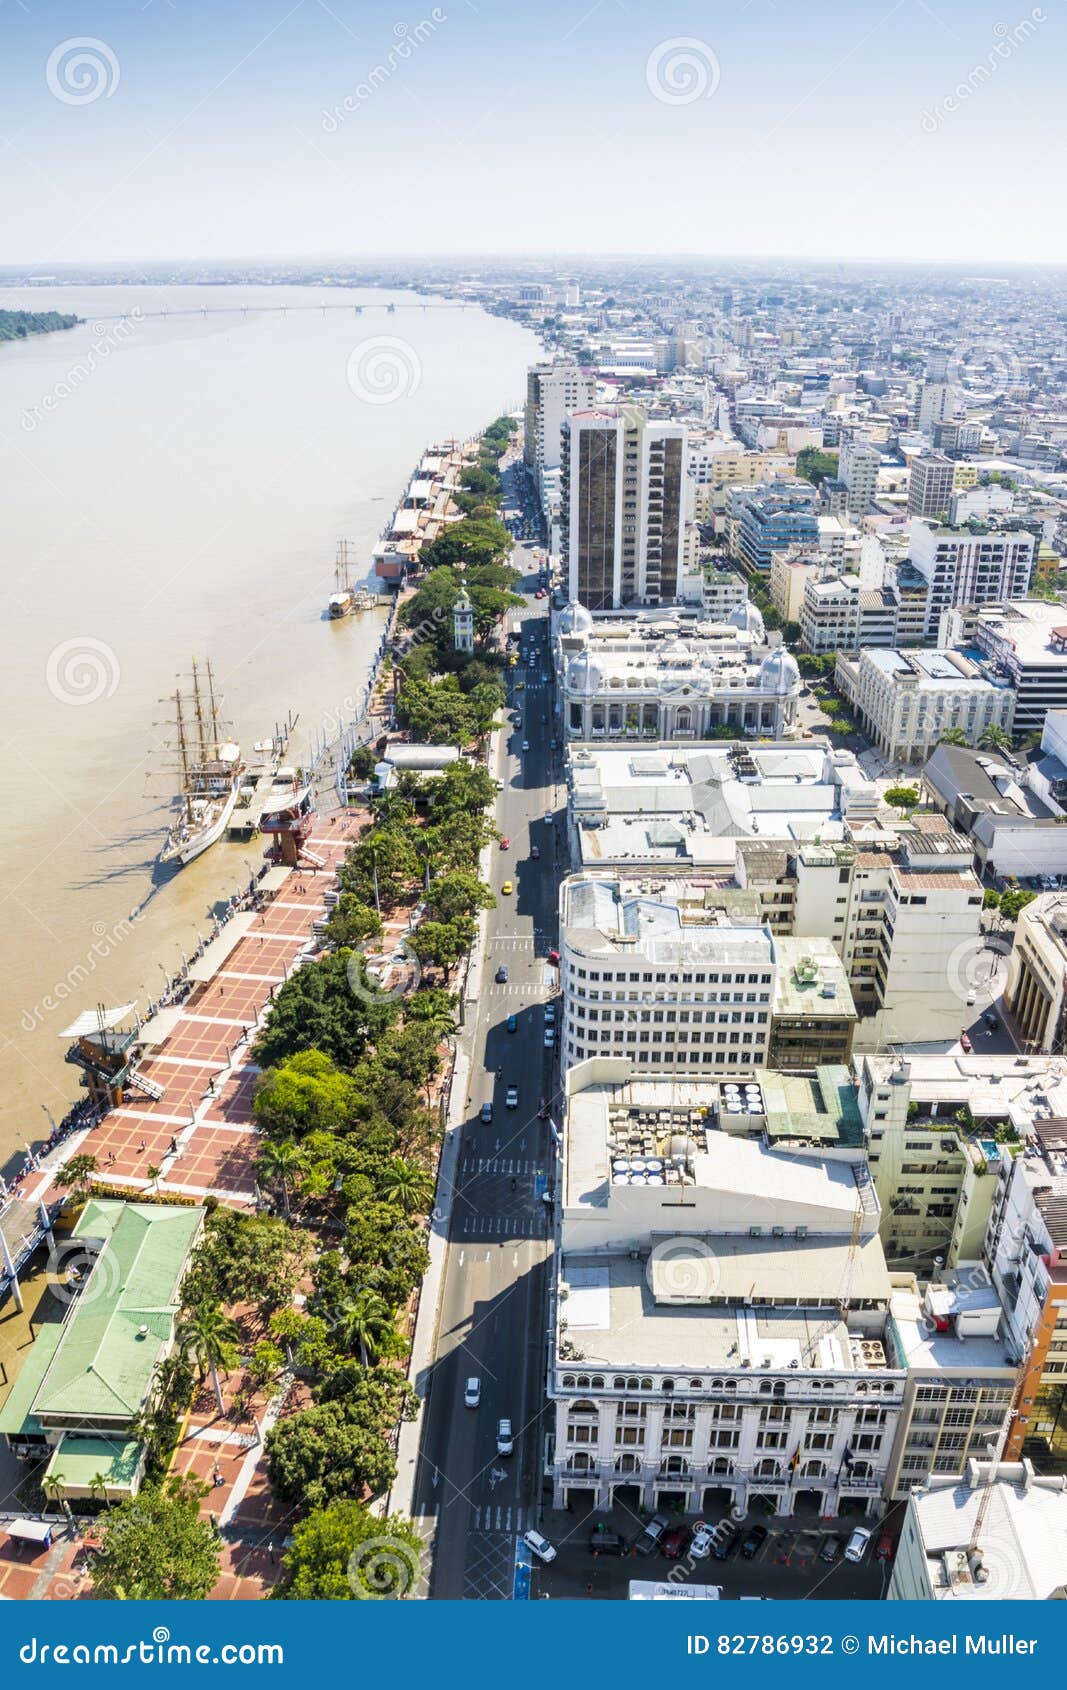 guayaquil city view from above